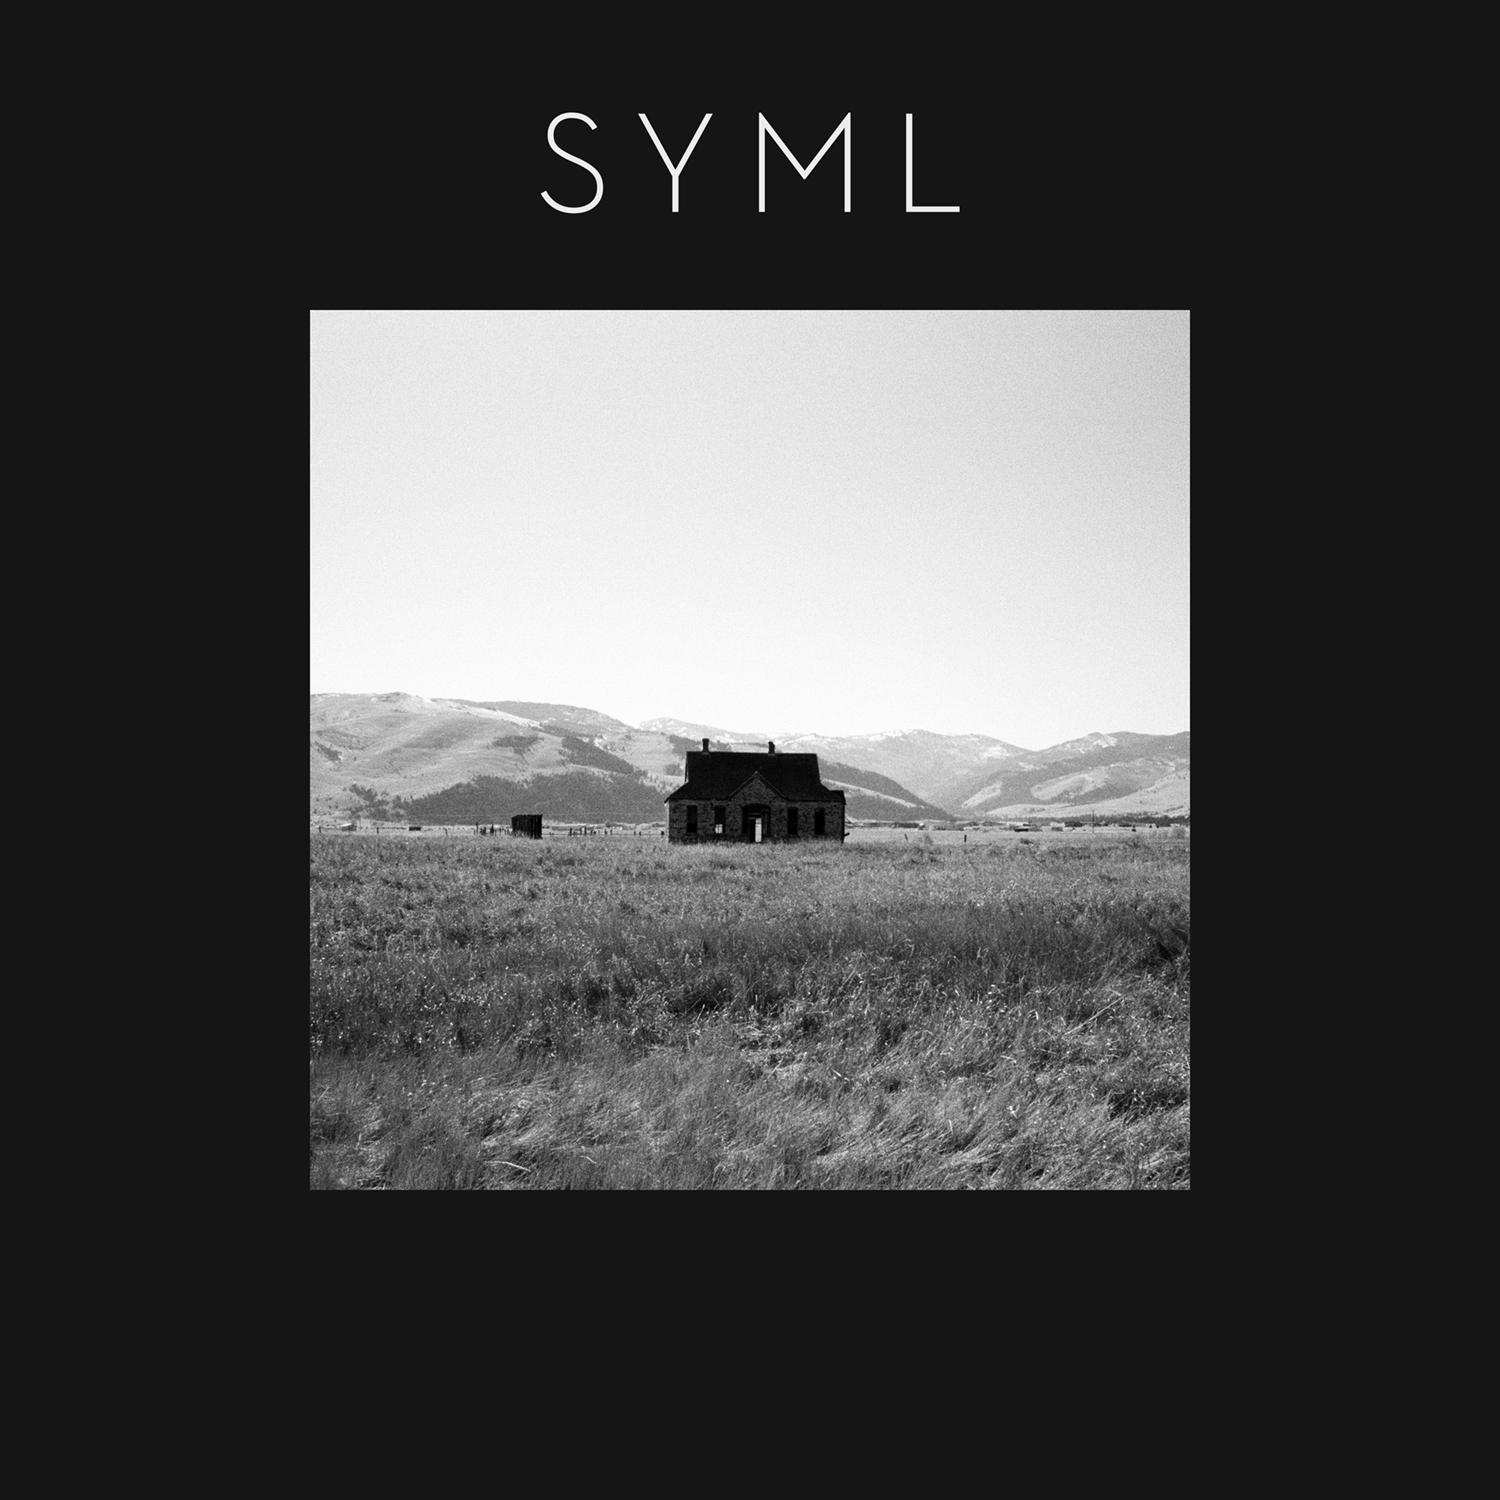 SYML - Symmetry (Mix For Trouble)